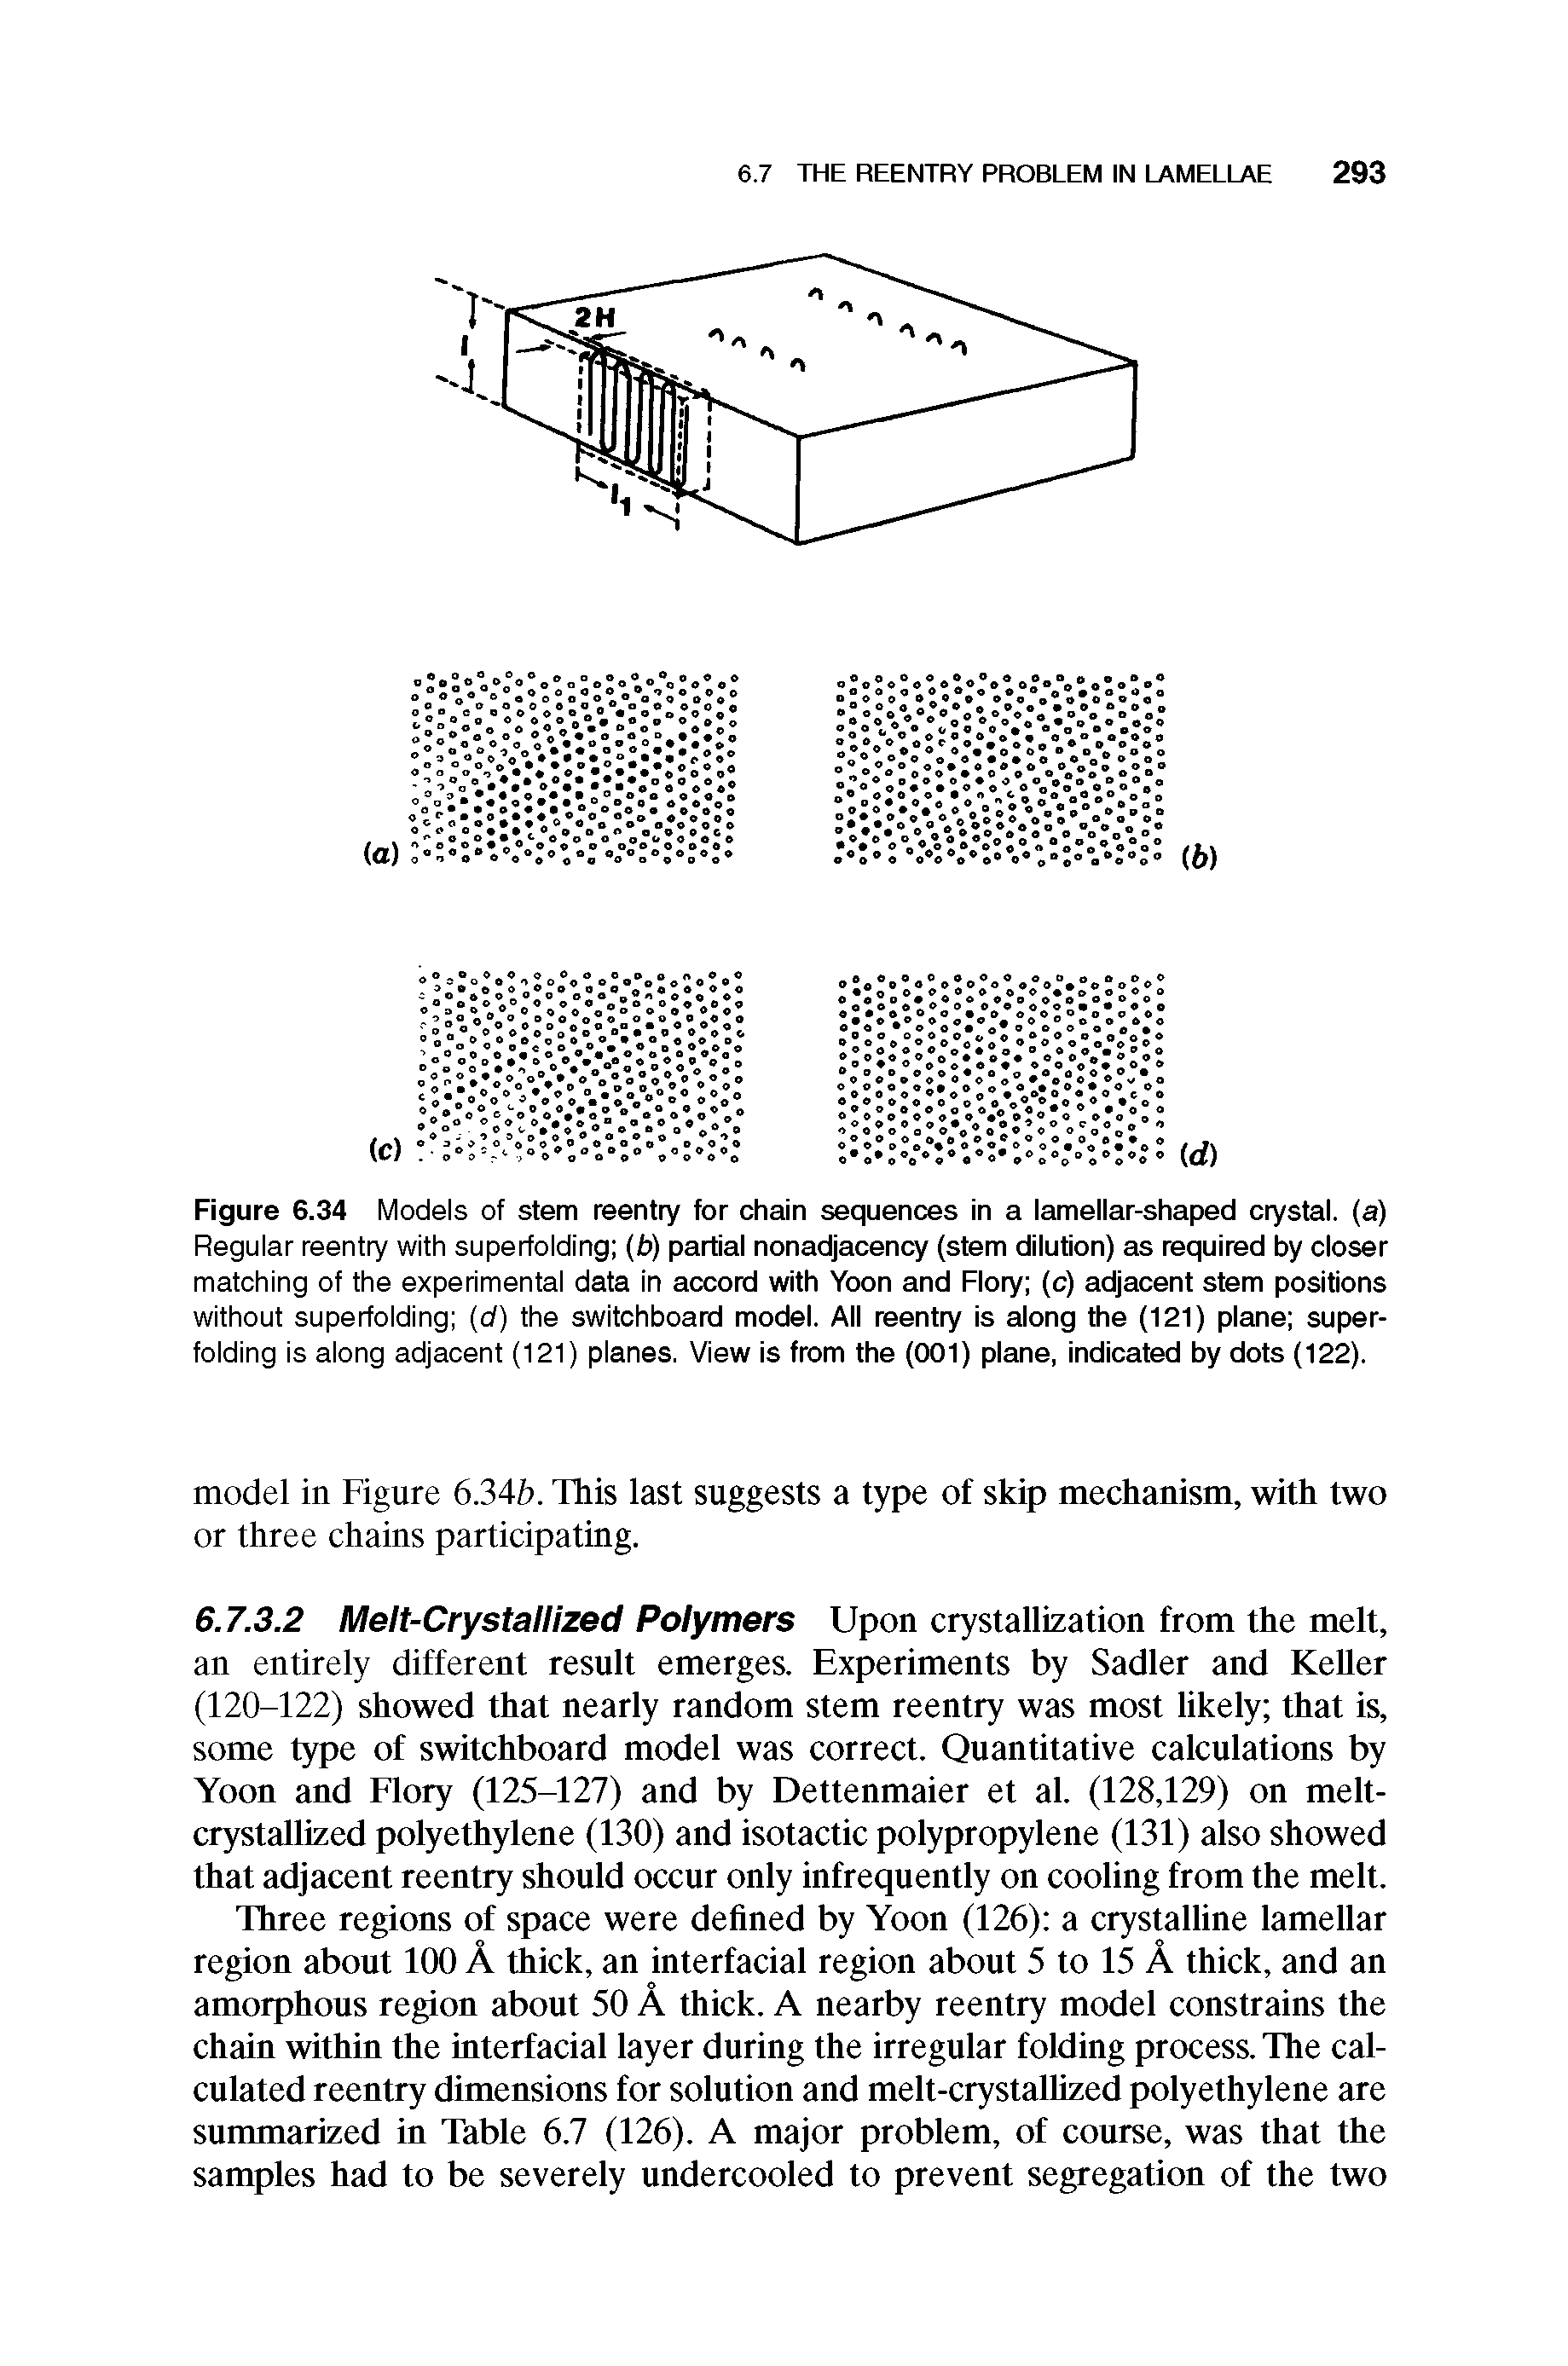 Figure 6.34 Models of stem reentry for chain sequences in a lameiiar-shaped crystal, (a) Regular reentry with superfolding (b) partial nonadjacency (stem dilution) as required by closer matching of the experimental data in accord with Yoon and Flory (c) adjacent stem positions without superfolding (d) the switchboard model. All reentry is along the (121) plane superfolding is along adjacent (121) planes. View is from the (001) plane, indicated by dots (122).